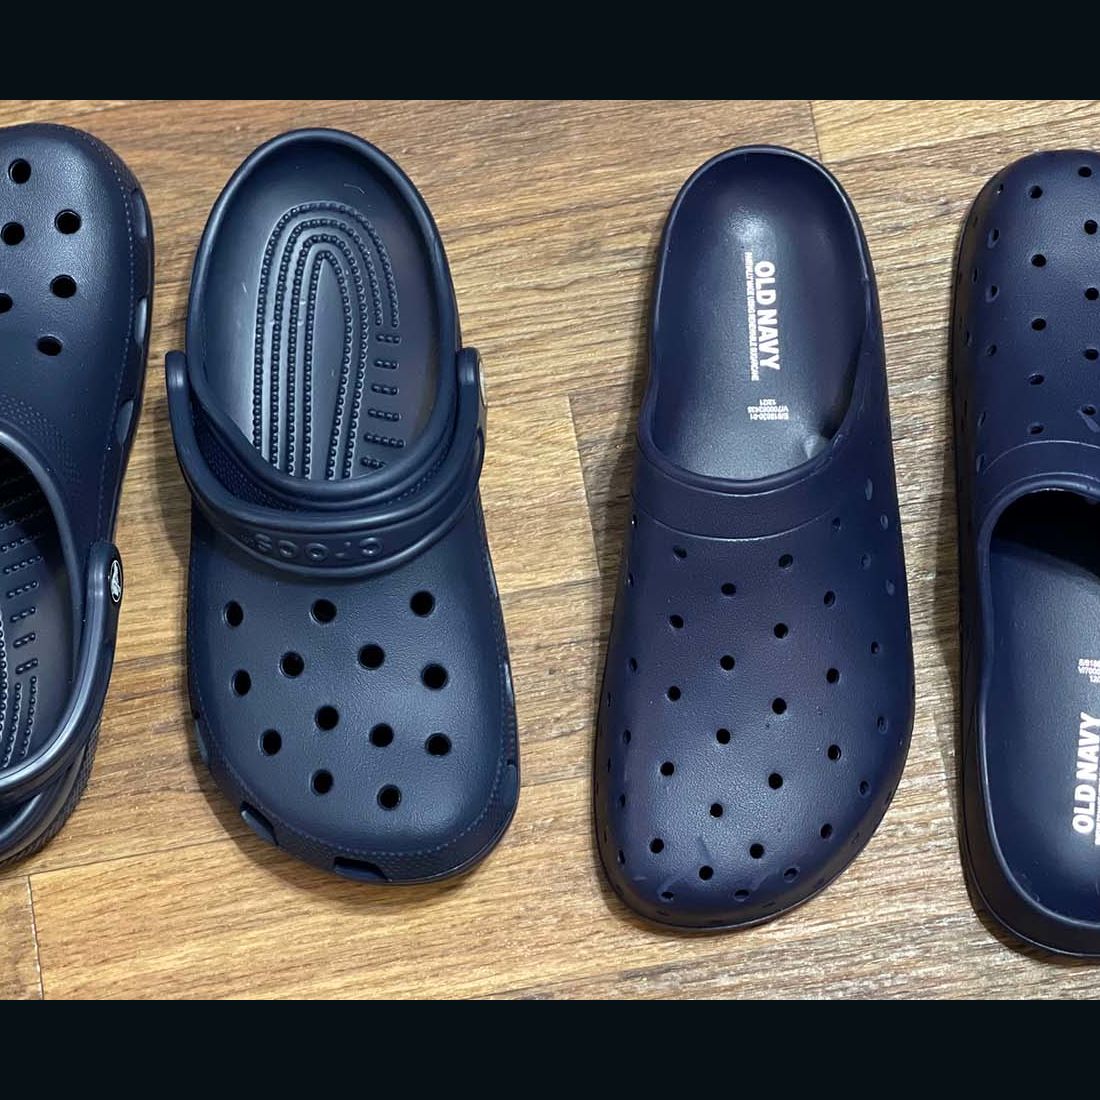 Crocs vs Old Navy clogs: We put these shoes to the test | CNN Underscored